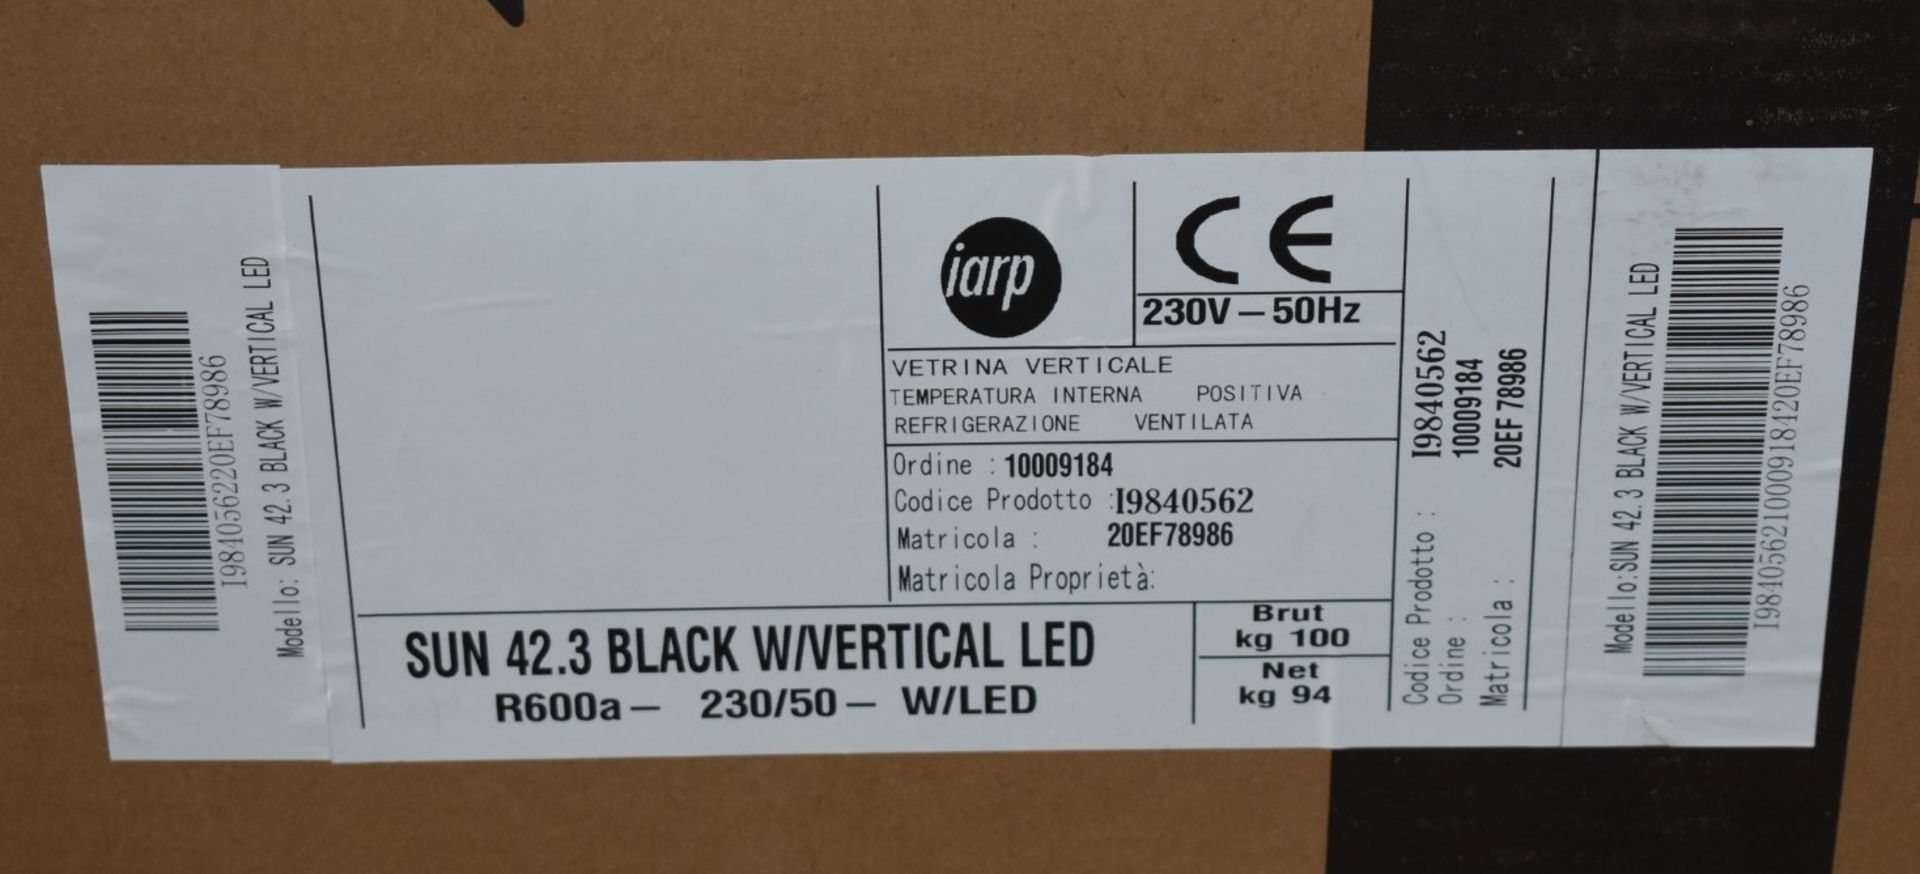 1 x Iarp Sun 42.3 Black Wine Cooler With Vertical LED Lights - Brand New Boxed Stock - Approx RRP £ - Image 2 of 3